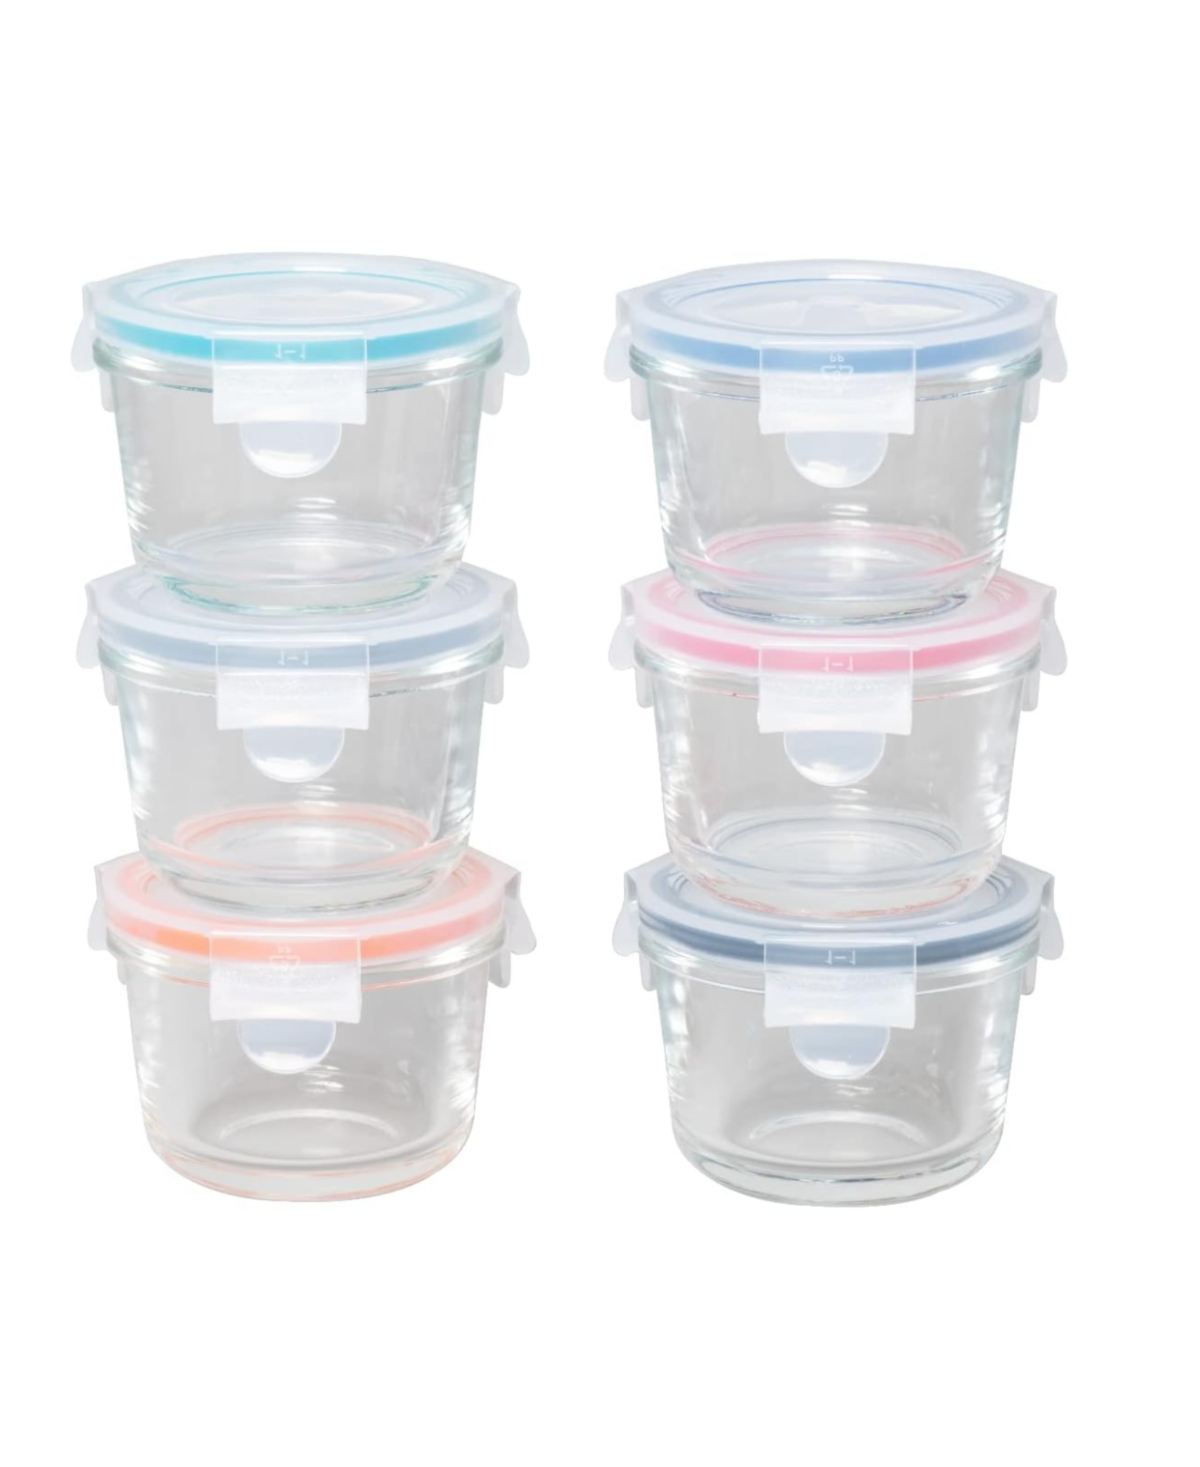 Shop Genicook 12 Pc Round Shape Borosilicate Glass Small Baby-size Meal And Food Storage Containers Set In Multicolor